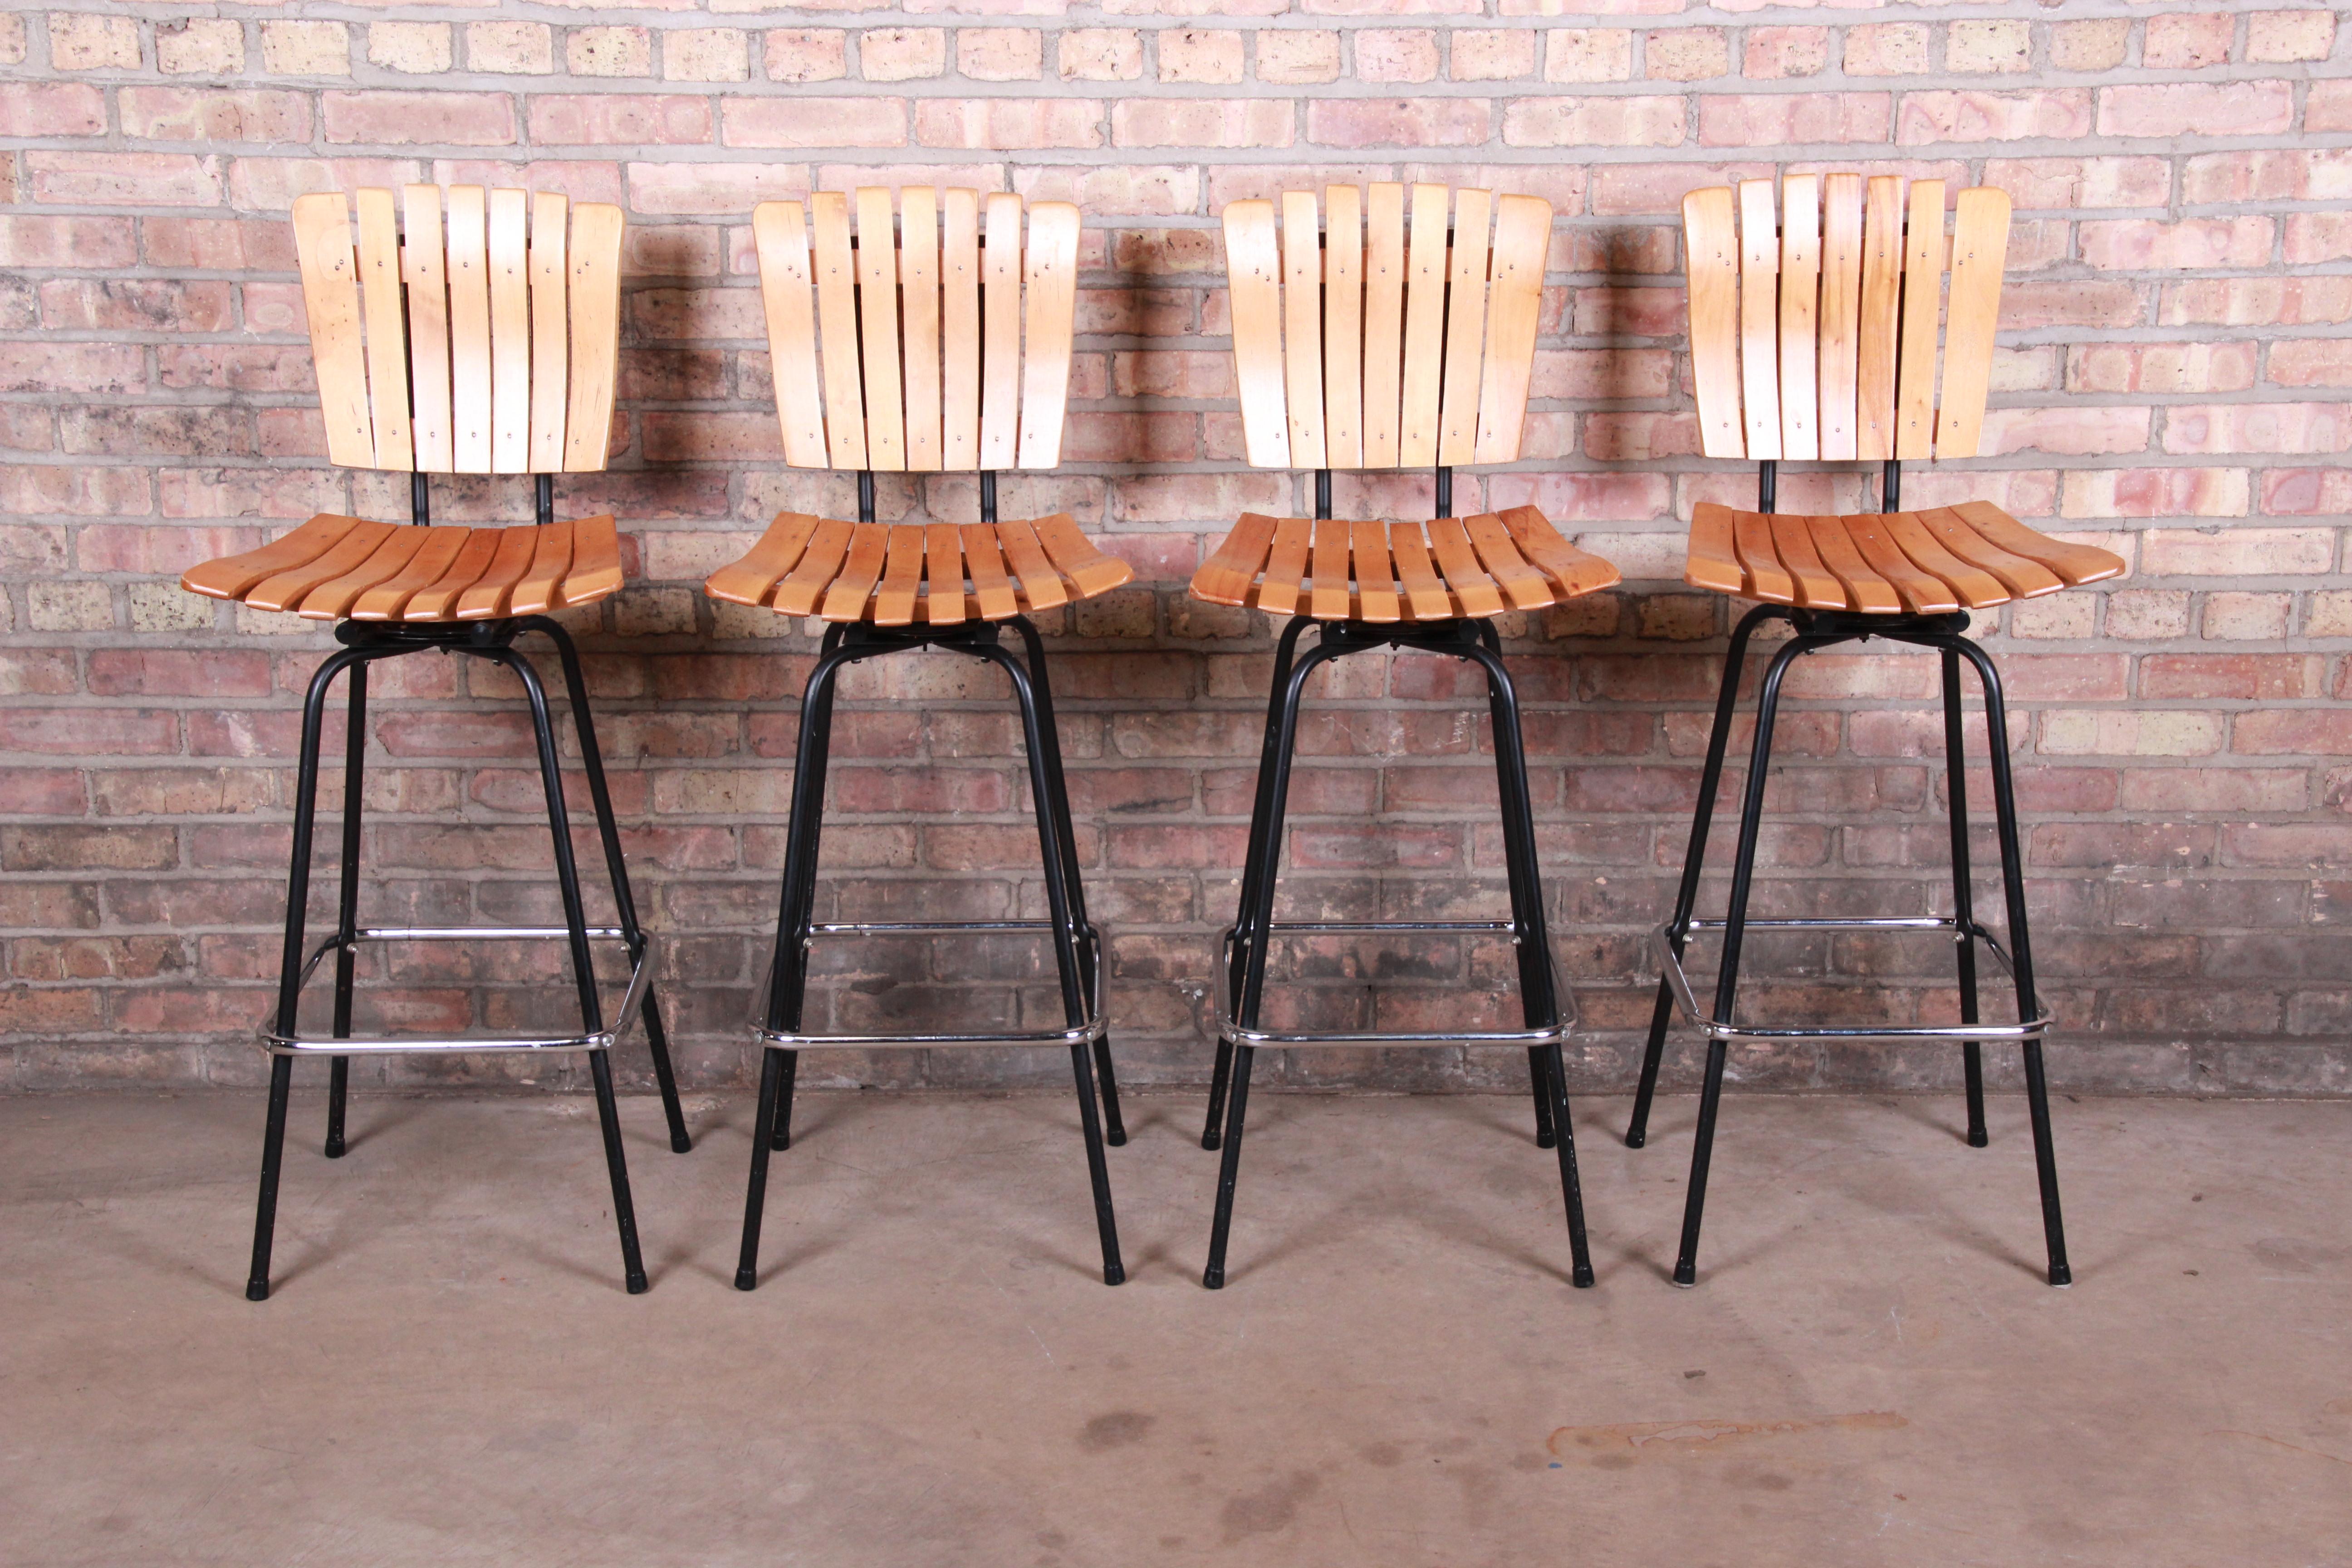 A gorgeous set of Mid-Century Modern swiveling bar stools

In the manner of Arthur Umanoff

USA, circa 1960s

Slatted wood seats and backs, with steel frames.

Measures: 17